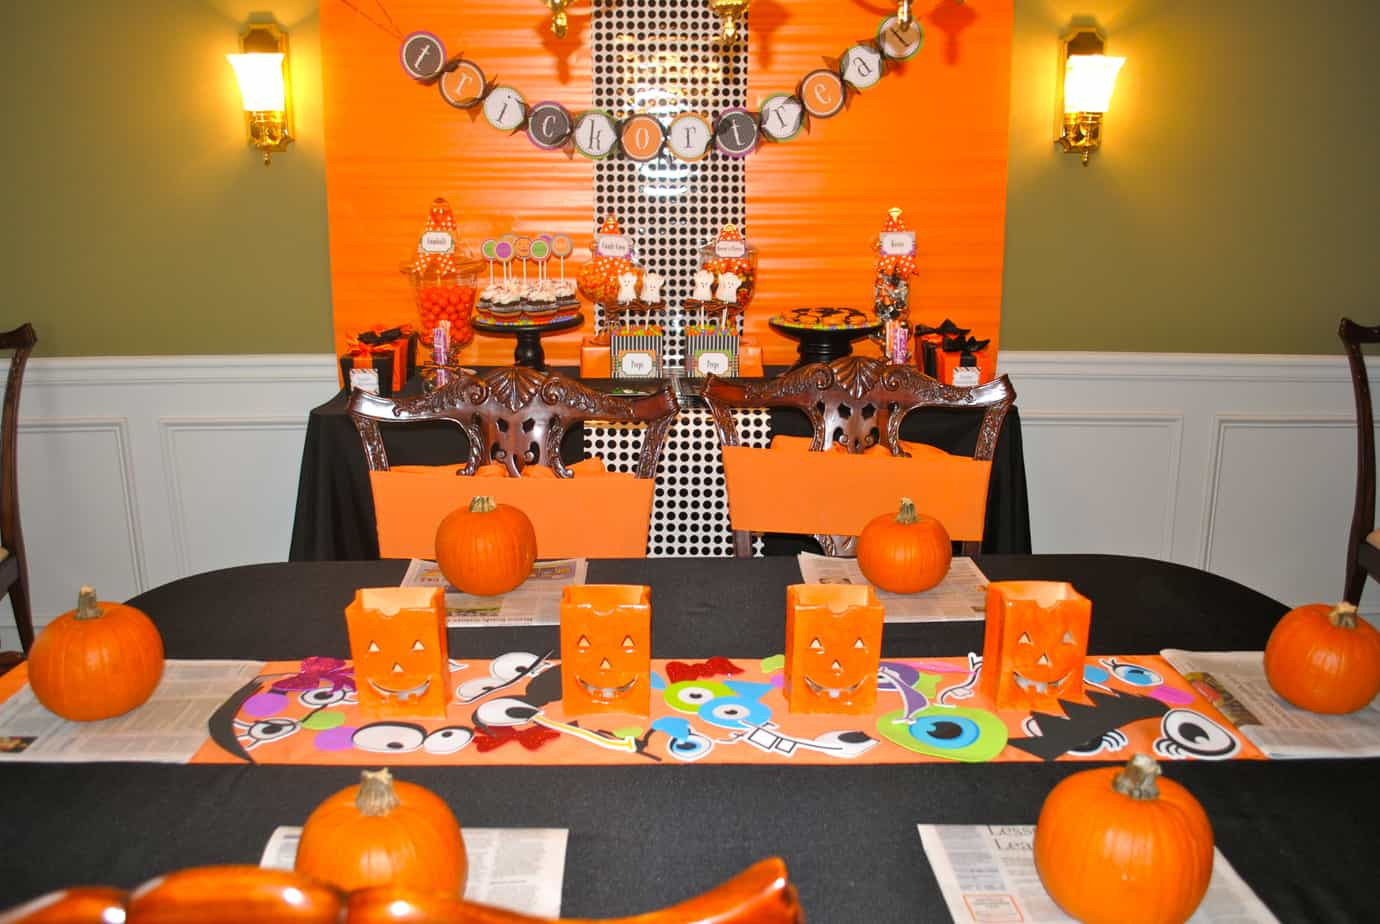 Halloween Theme Party Ideas For Adults
 Halloween Party Ideas For Kids 2019 With Daily